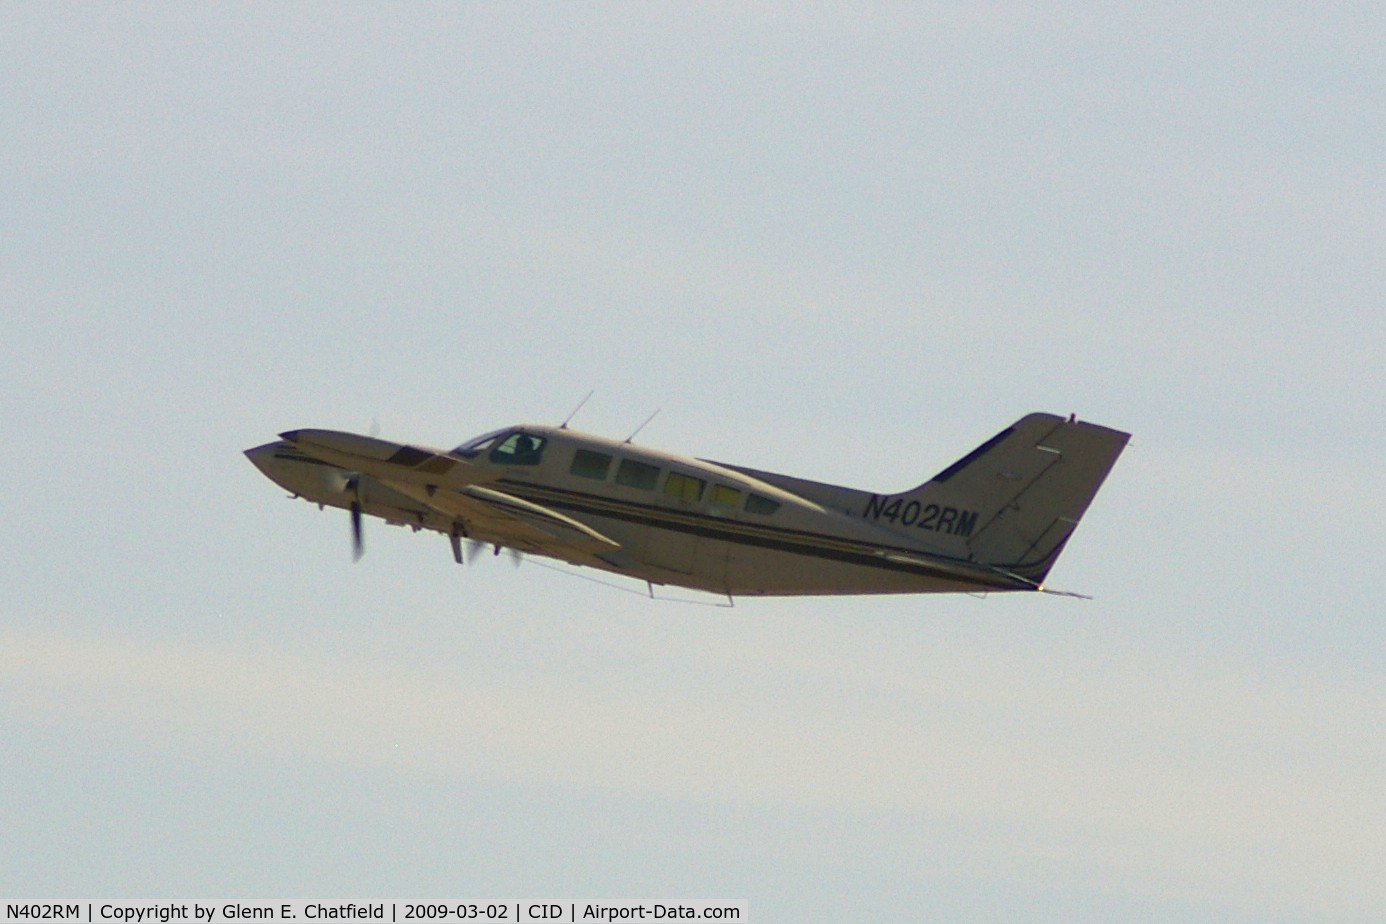 N402RM, 1974 Cessna 402B C/N 402B0607, Climbing out after taking off Runway 9